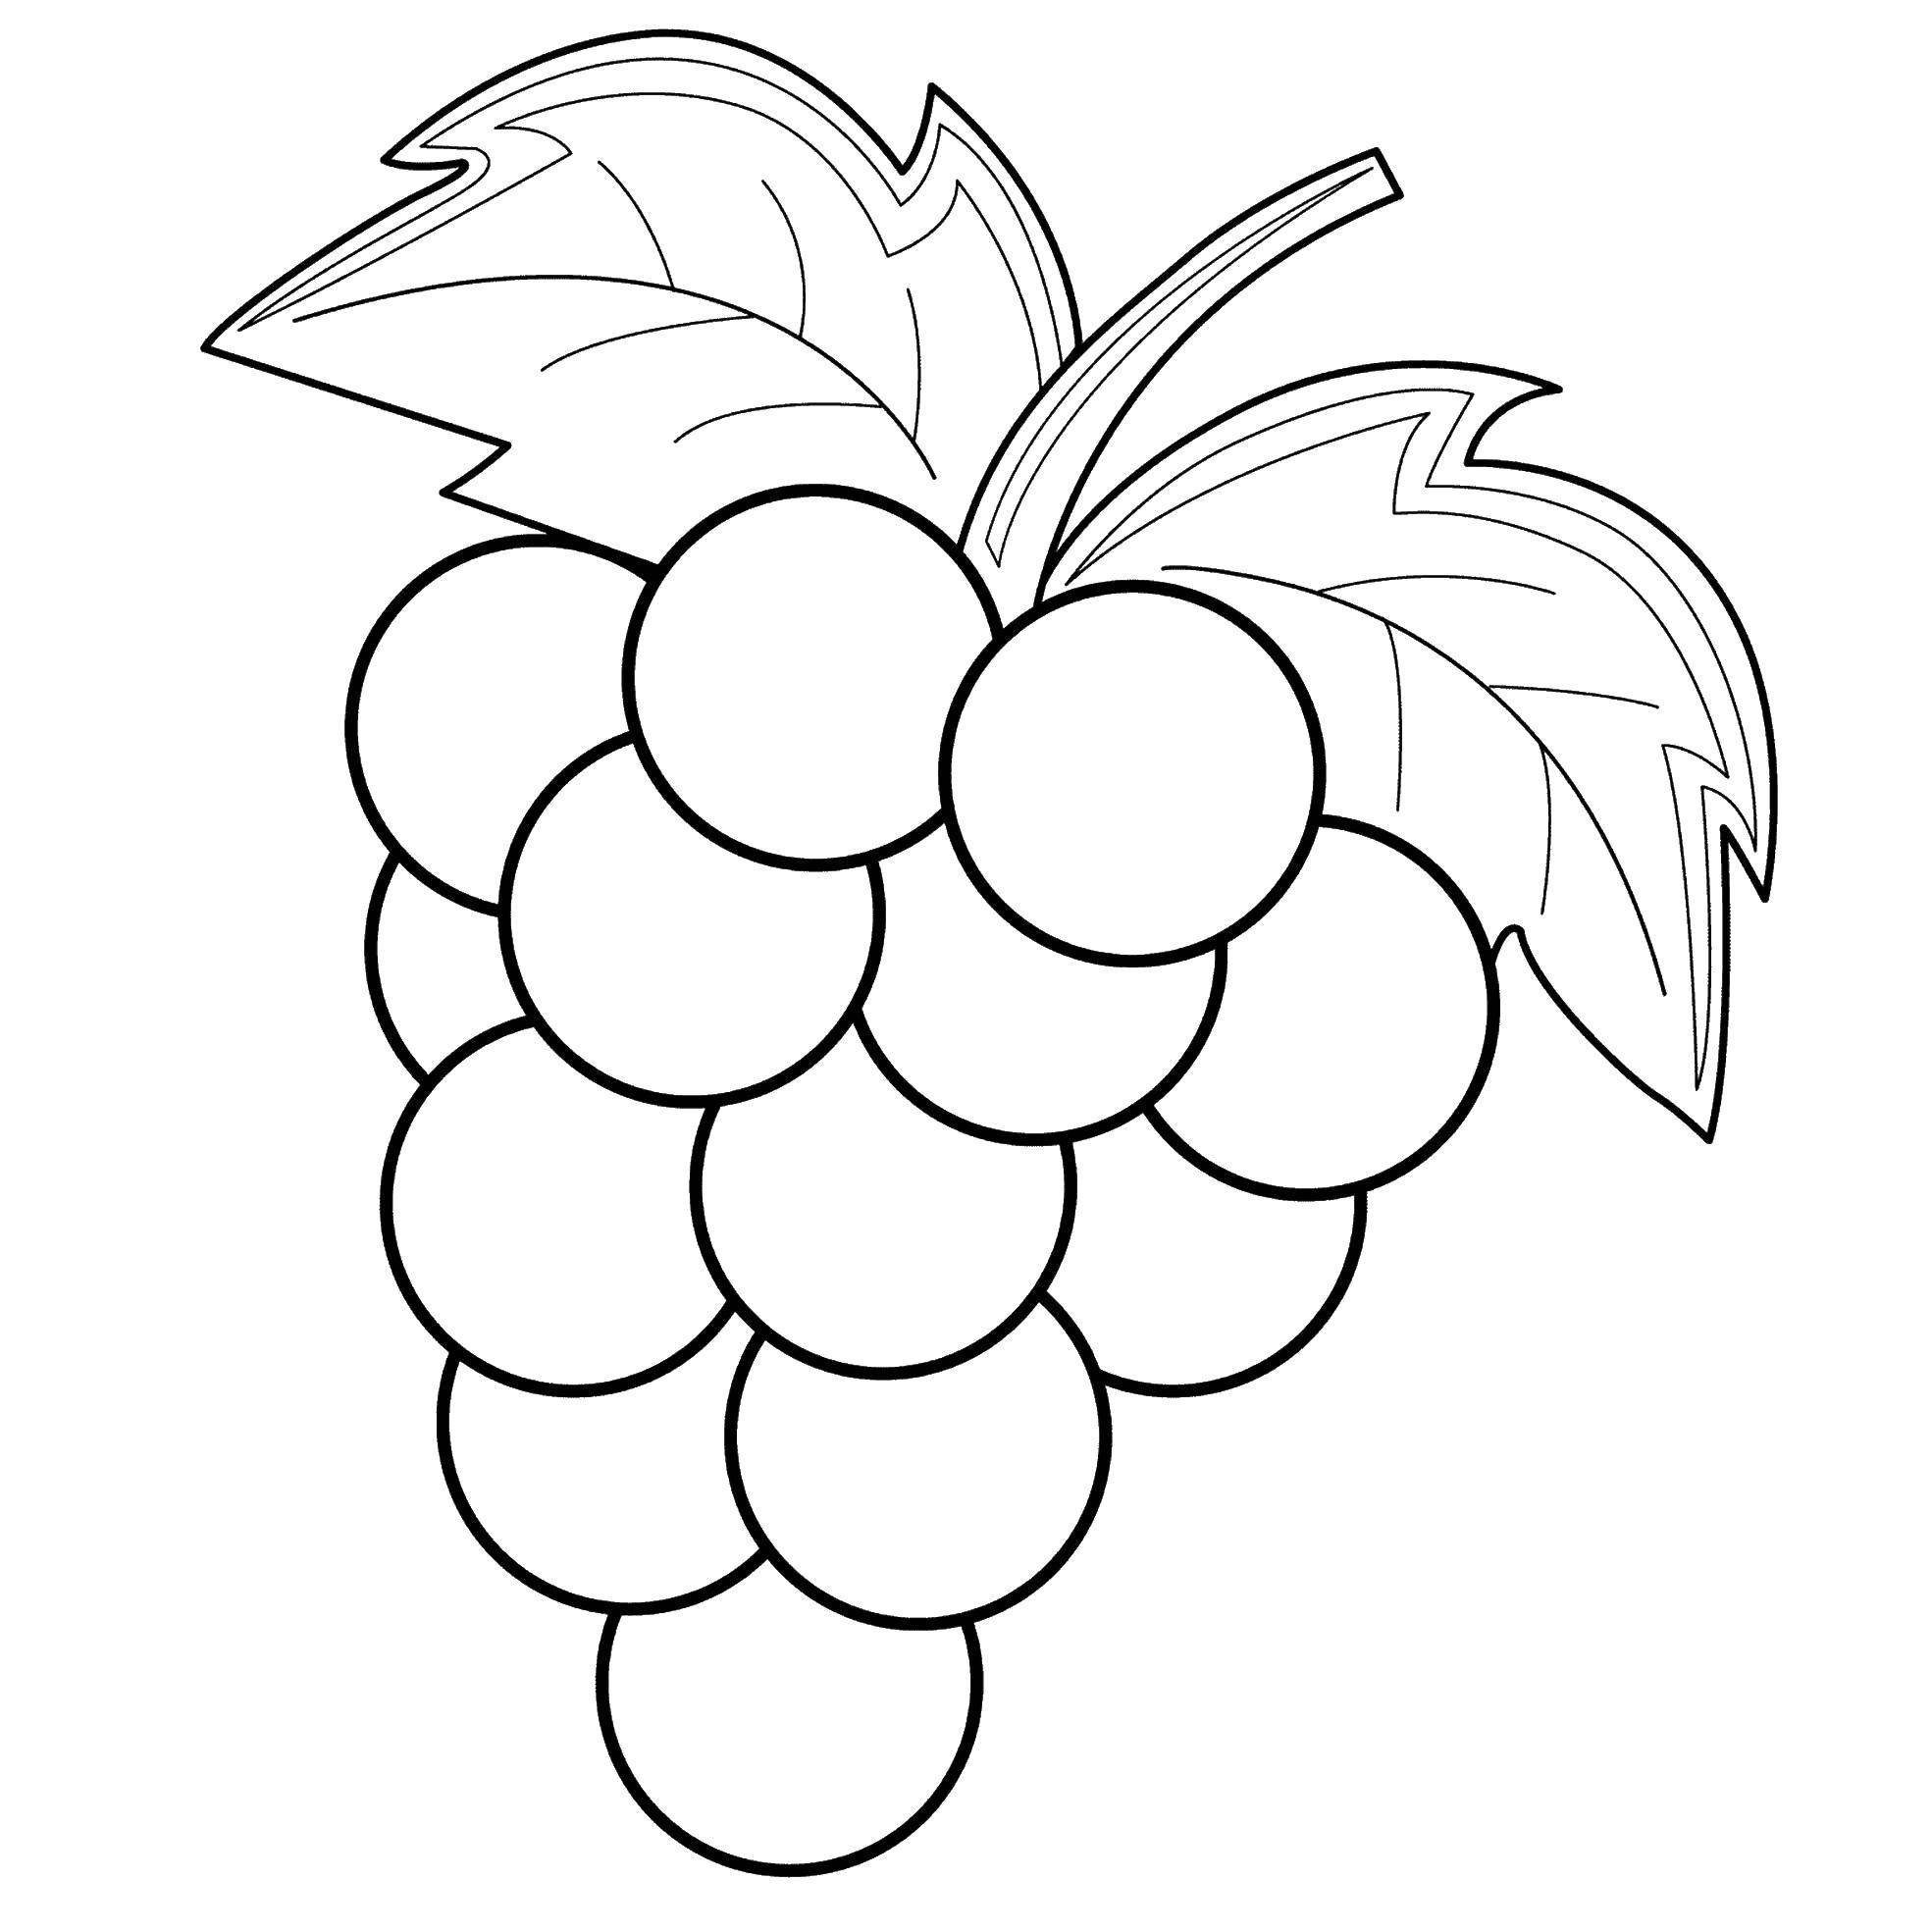 Coloring Grapes. Category berries. Tags:  Berries.